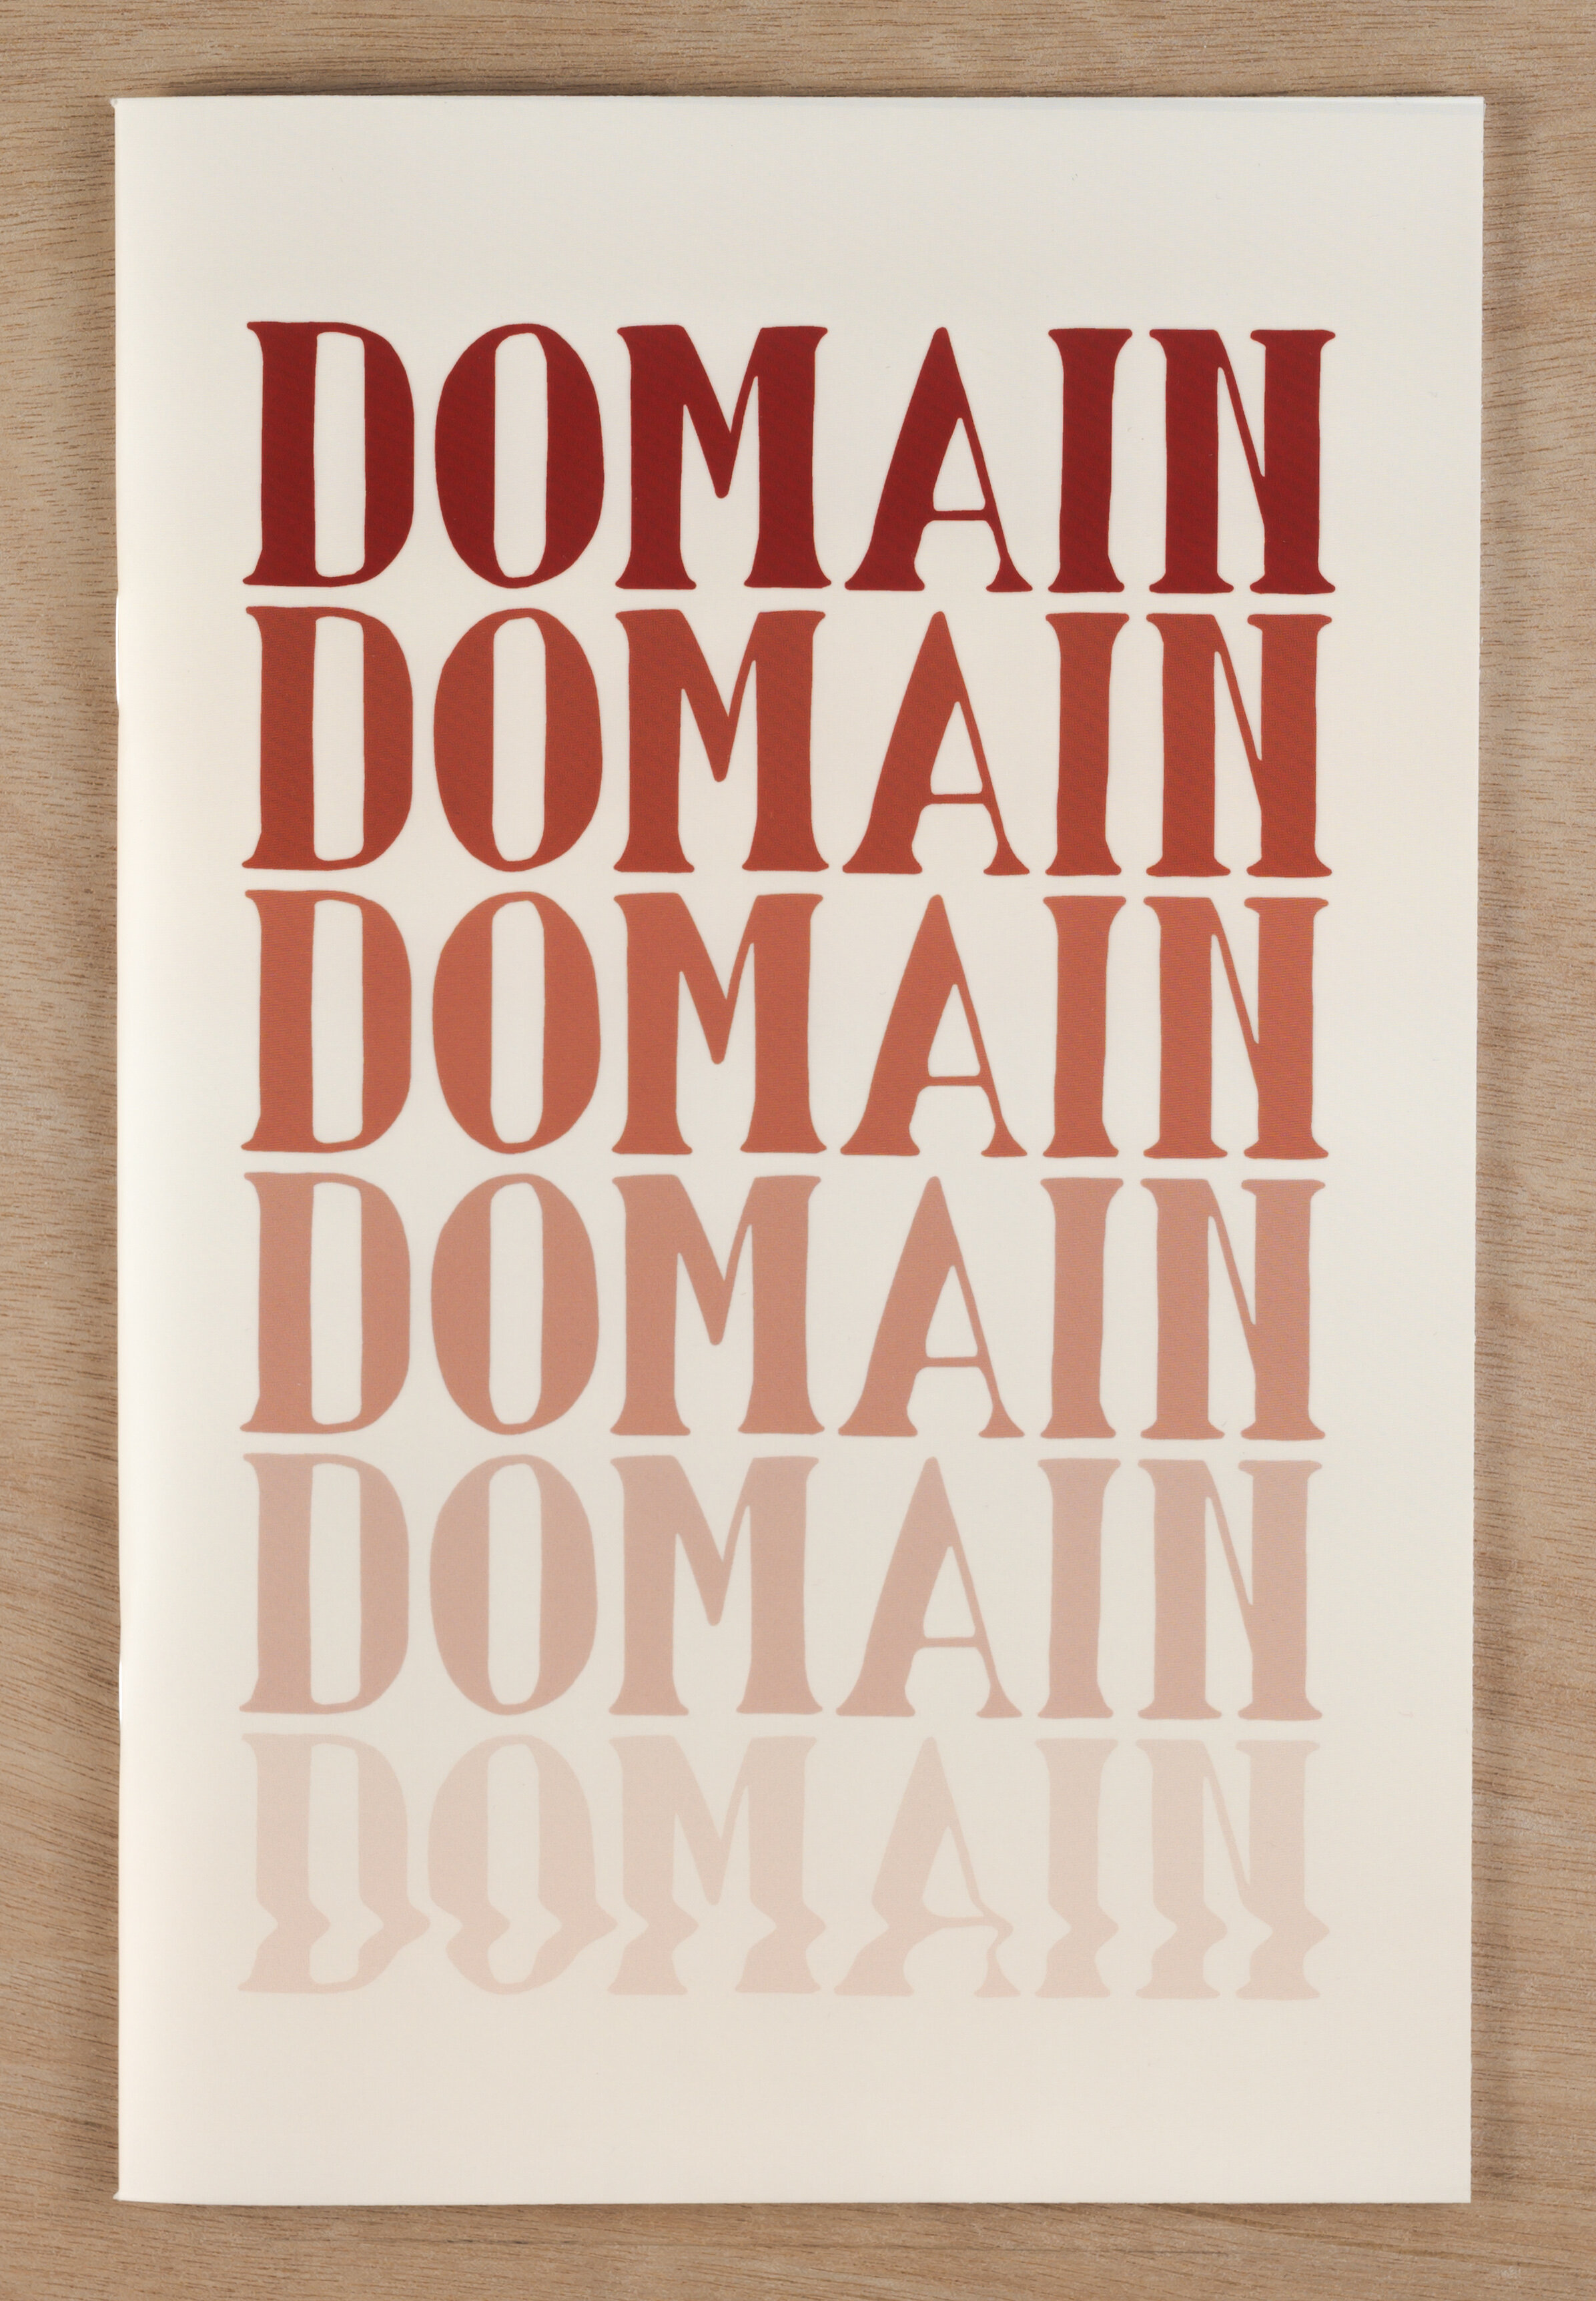  Domain - Self Published - 24 Pages, 5.5” x 8.5”, Saddle Stitched  With additional imagery from The New York Public Library. 